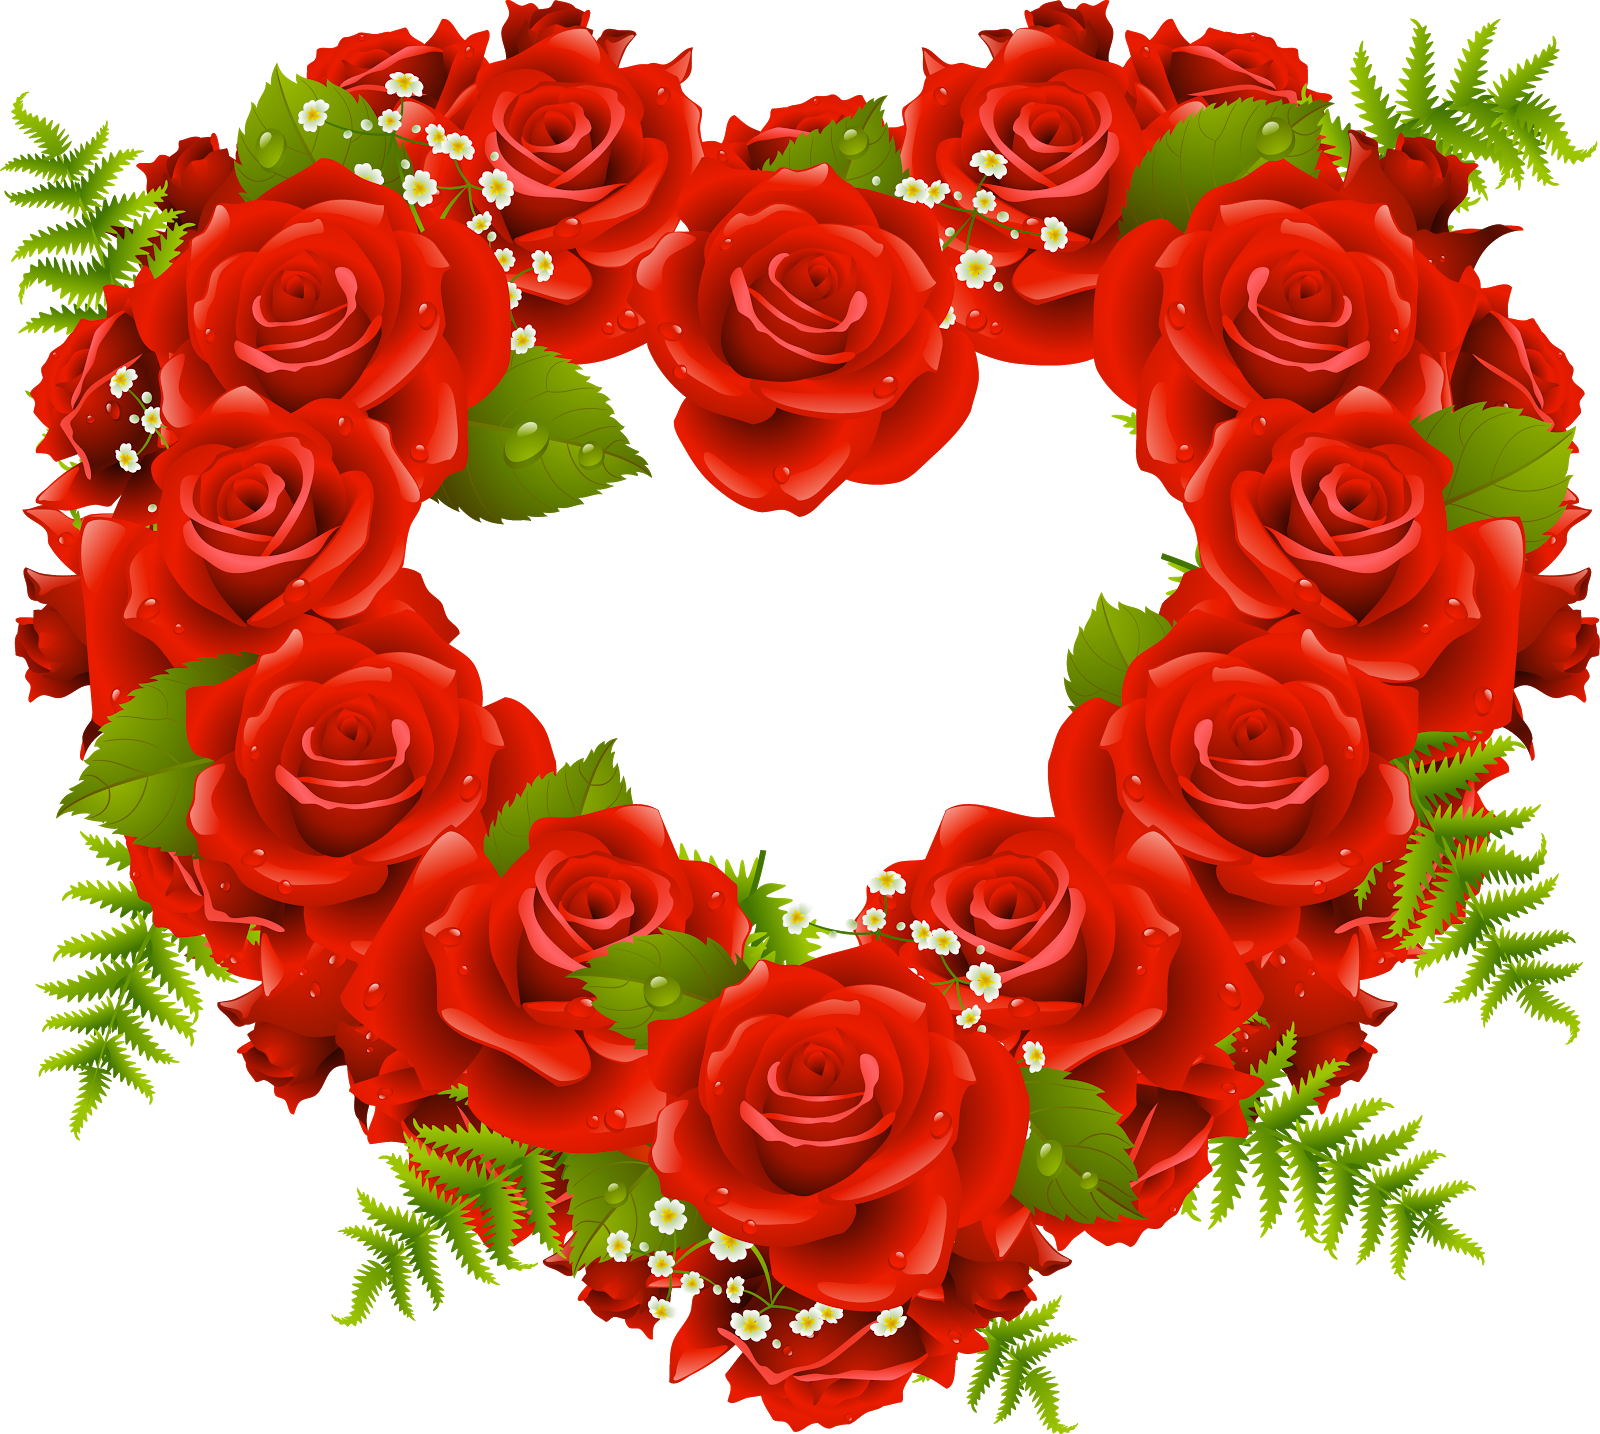 41-410062_rose-png-flowers-for-wedding-png